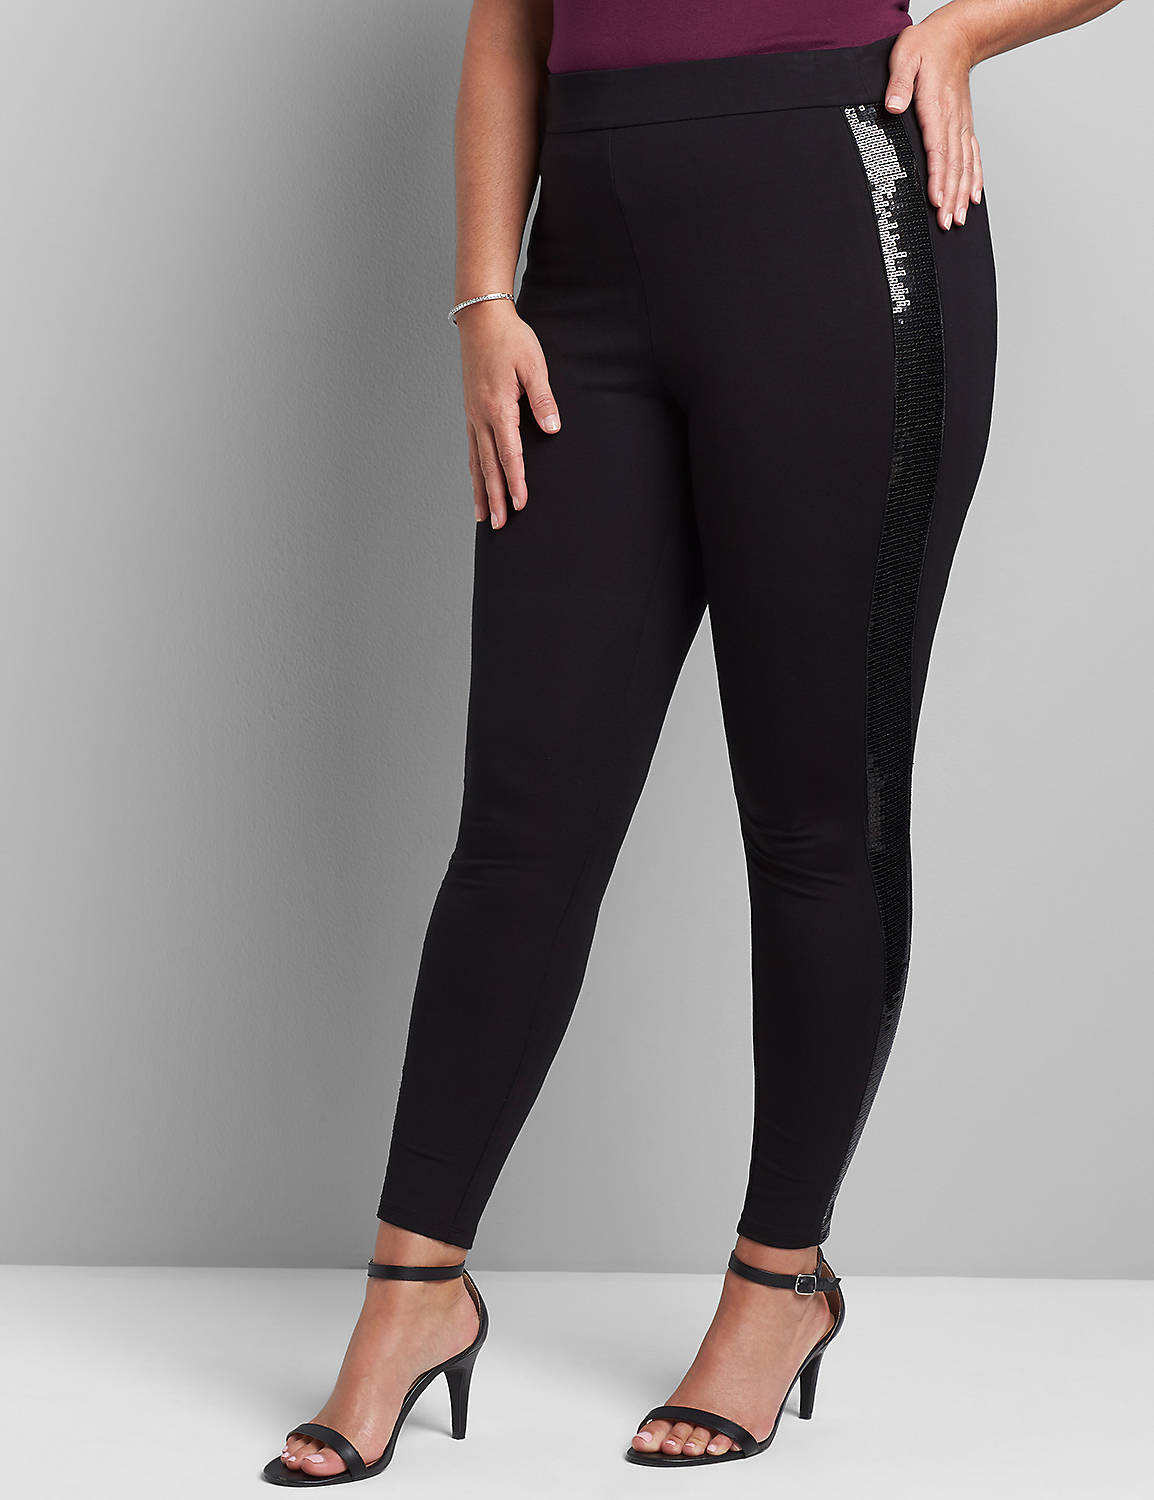 Ponte Legging with Sequin Side Tape 1117348:Pitch Black LB 1000322:18/20 Product Image 1